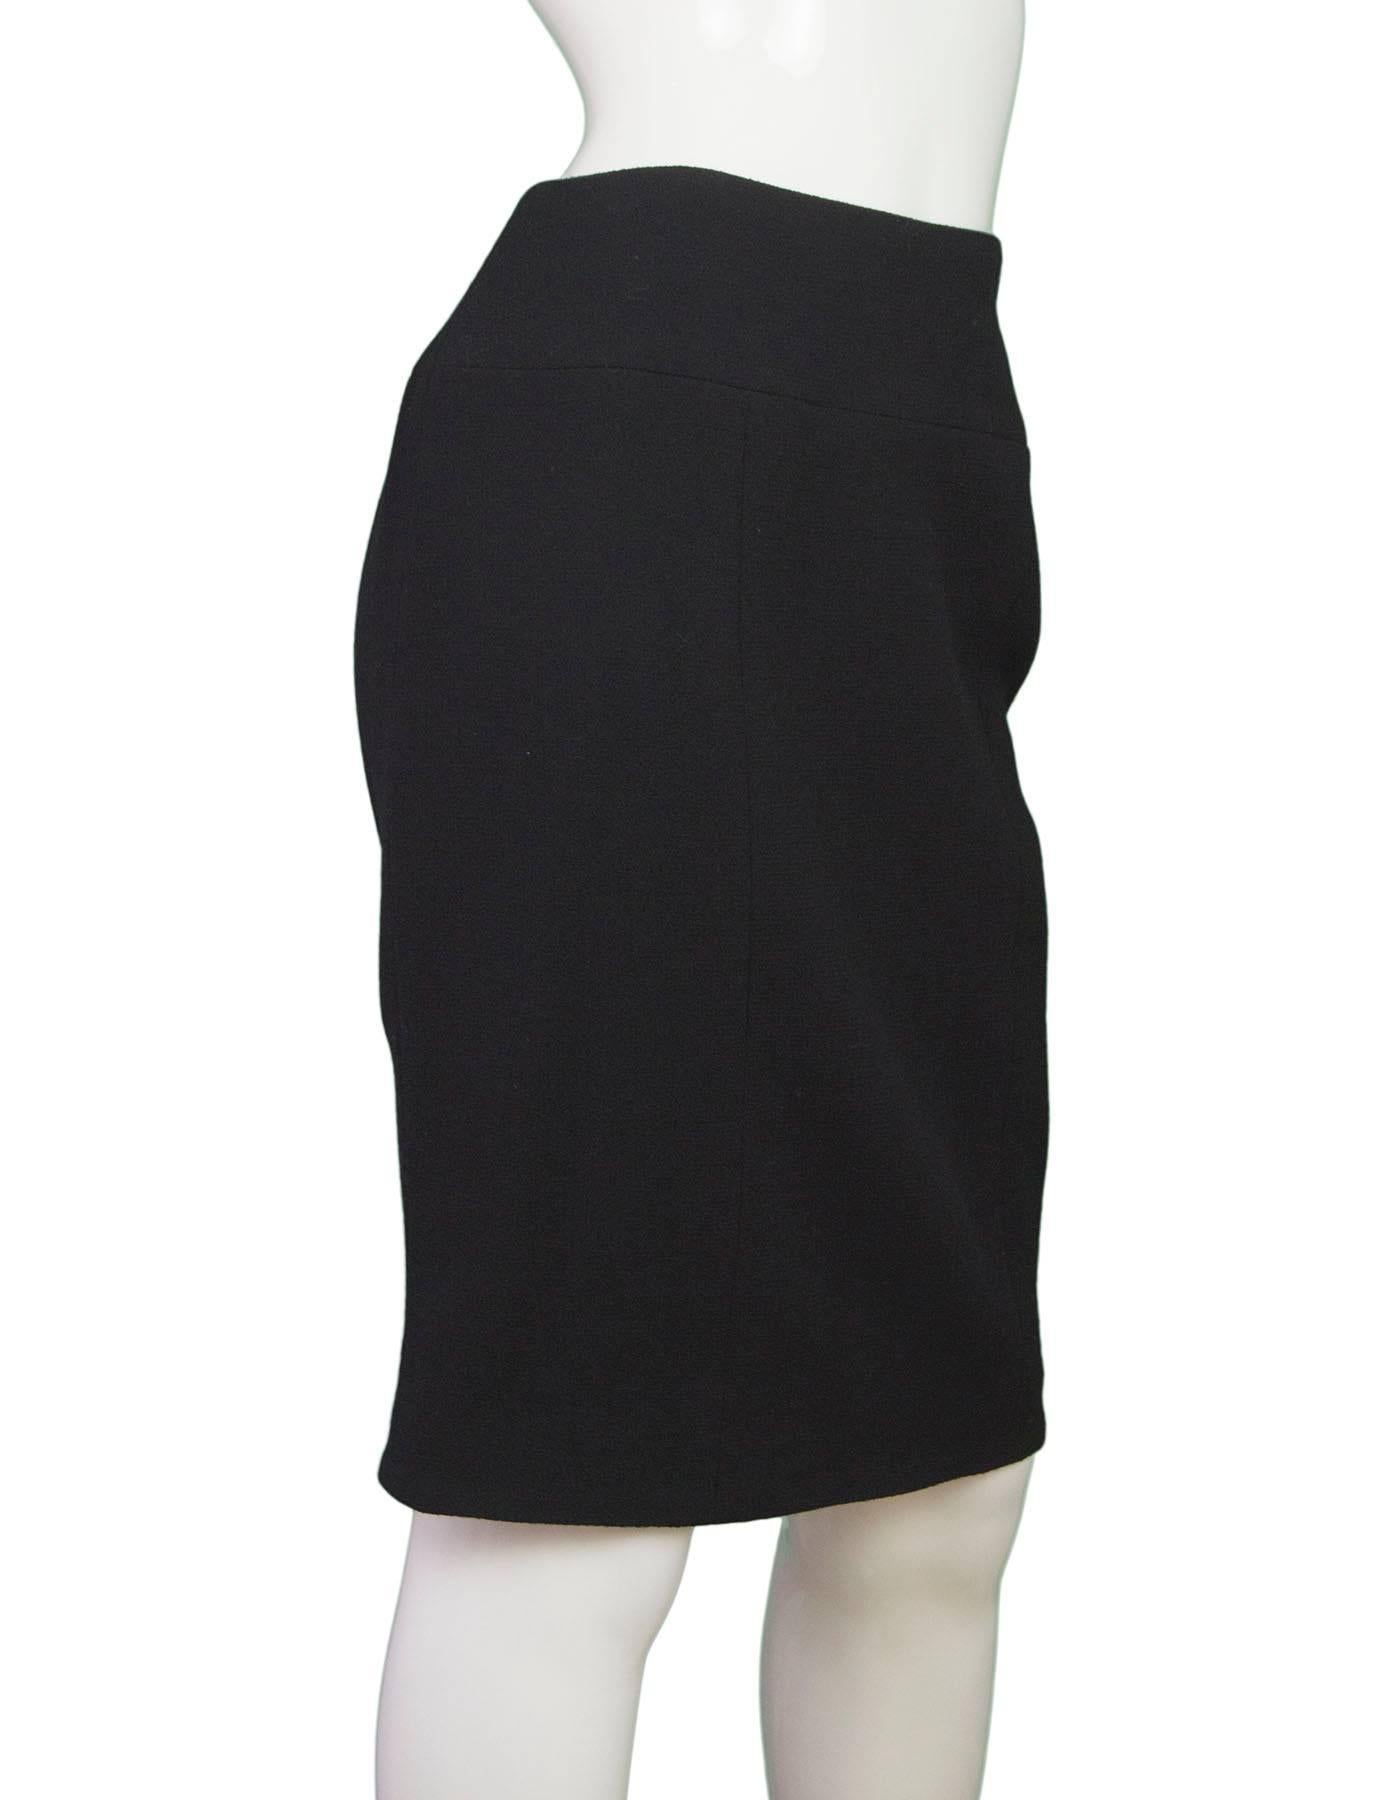 Chanel Black Wool Pencil Skirt 

Made In: France
Year of Production: 1996
Color: Black
Composition: 100% wool
Lining: Black, 95% silk, 5% lycra
Closure/Opening: Back center zipper closure with hook and eye closure
Exterior Pockets: